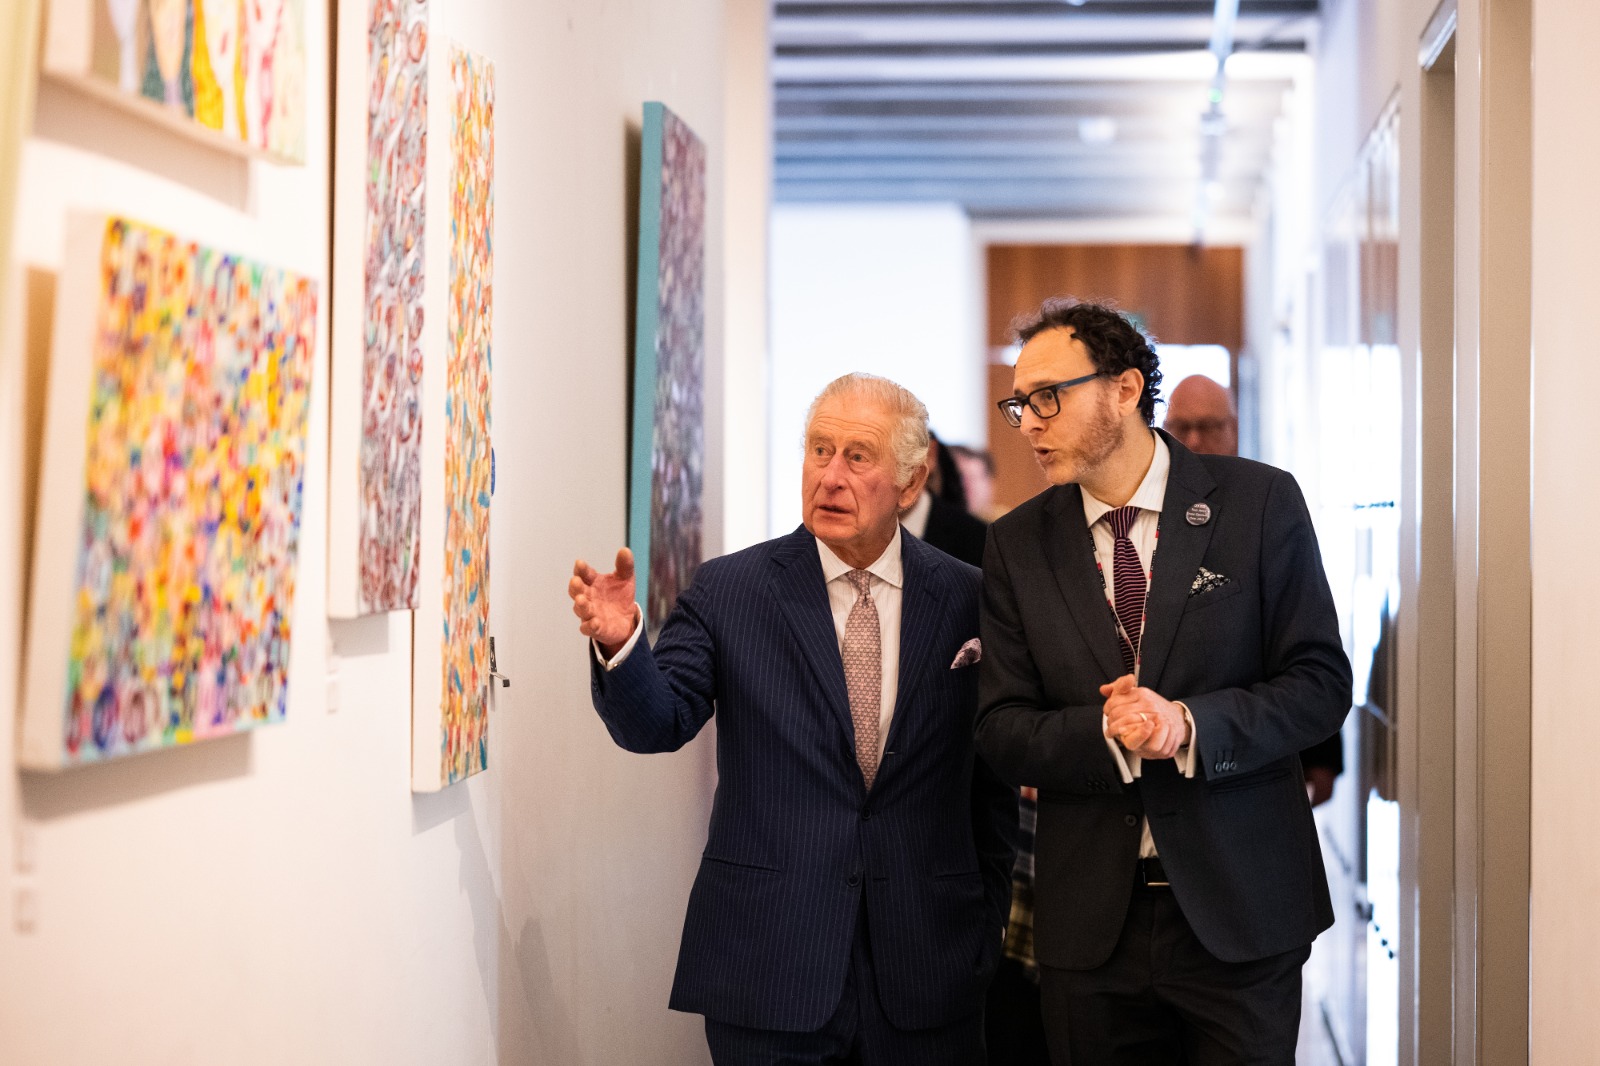 King Charles III looking at artwork by Orna Schneerson Pascal